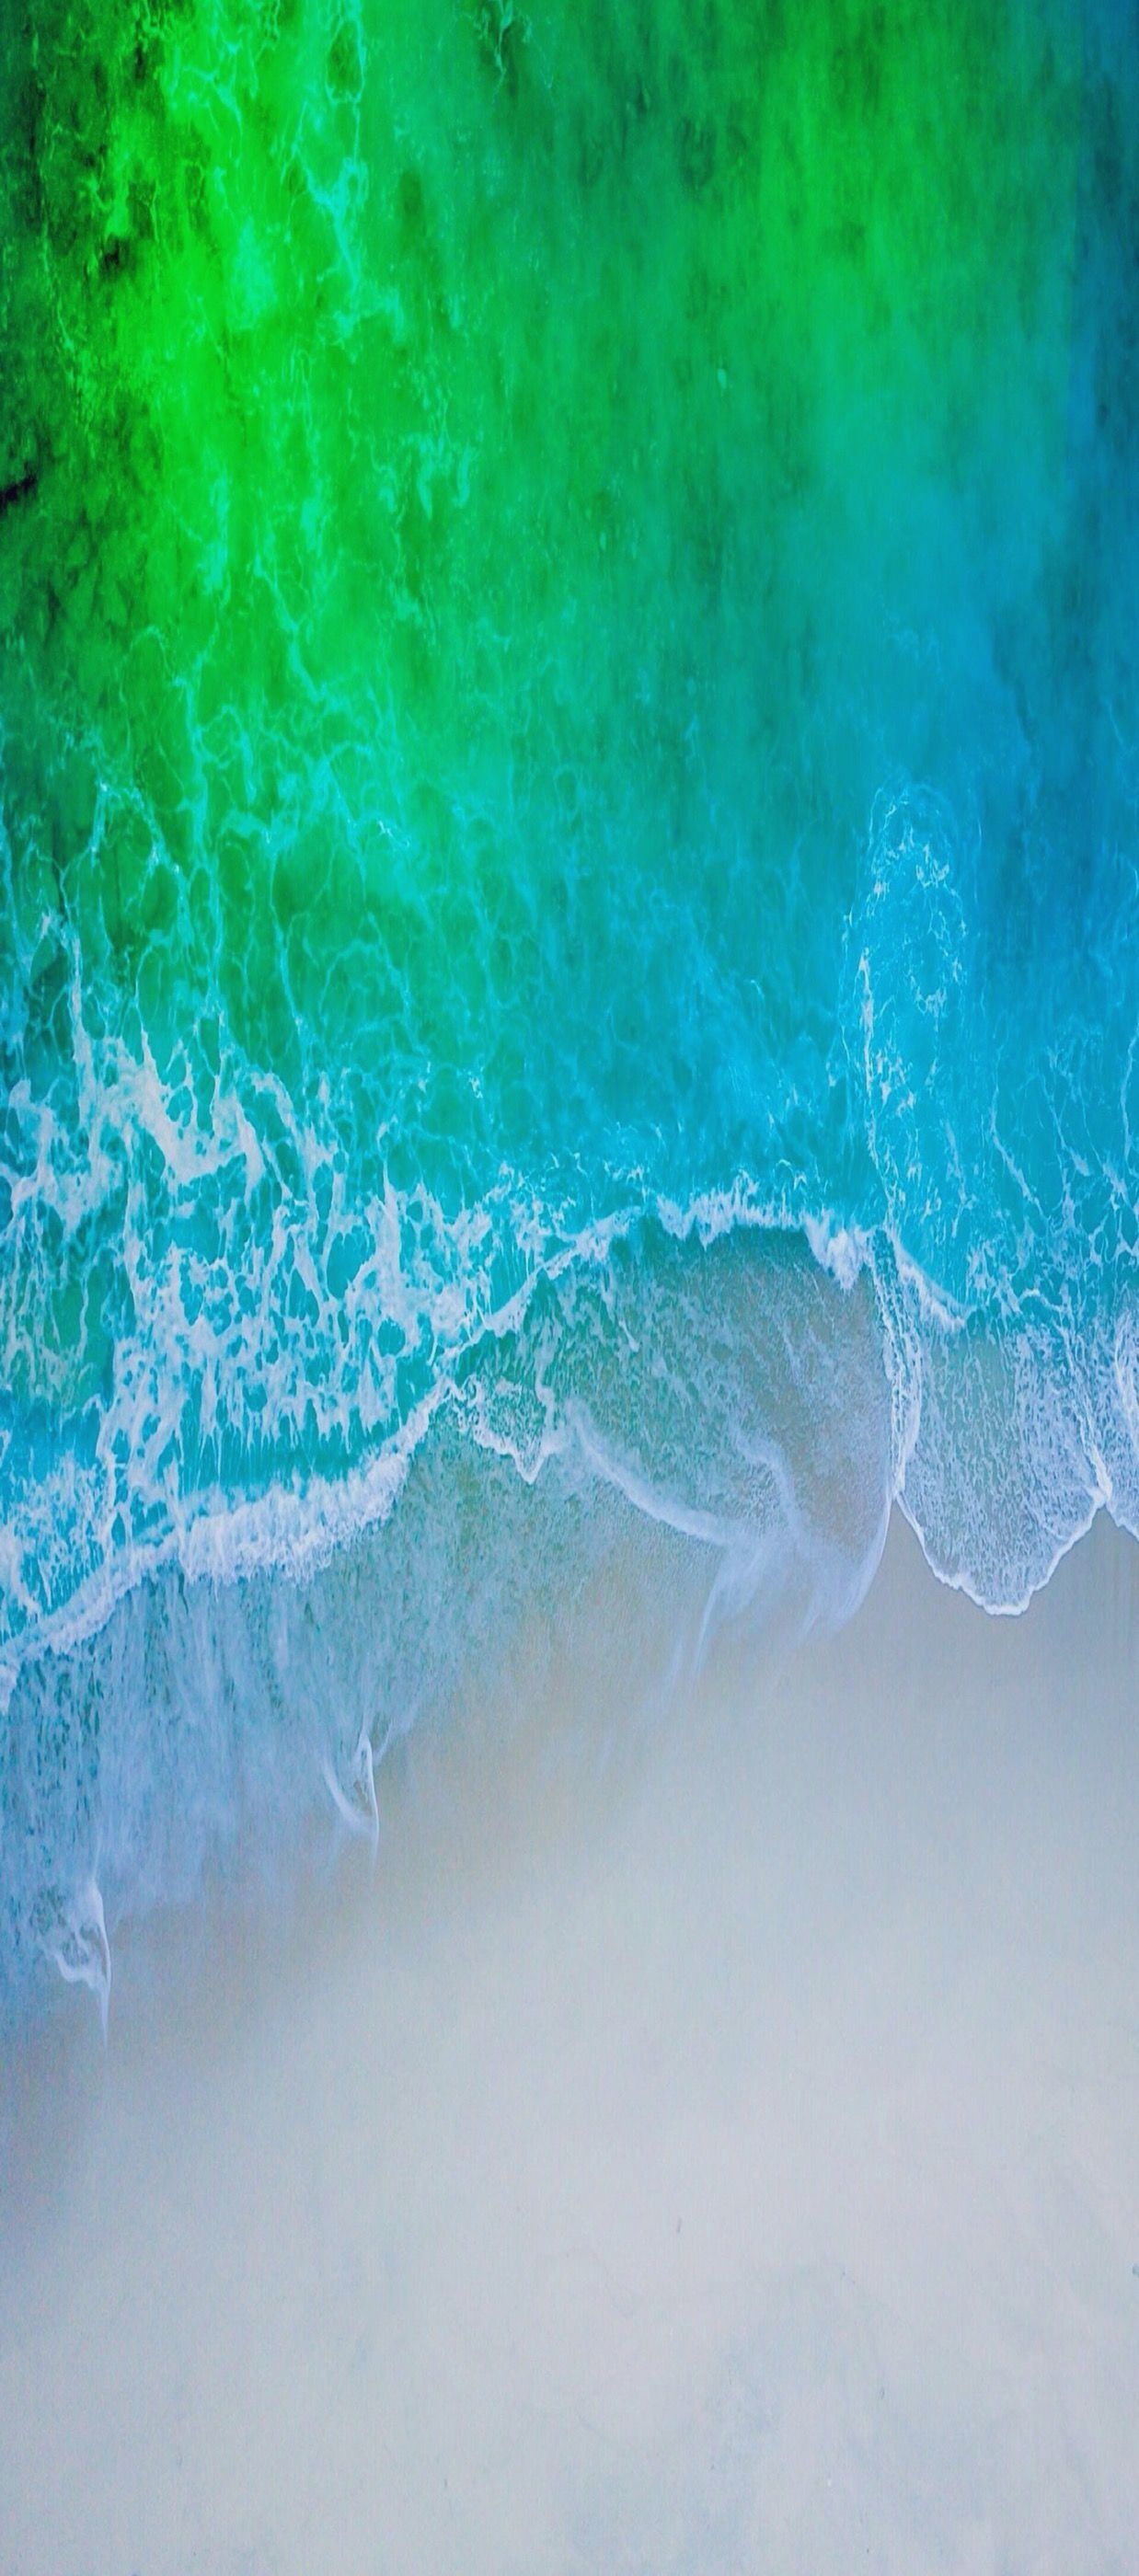 Page 3 | Iphone Wallpaper Background Water Images - Free Download on Freepik